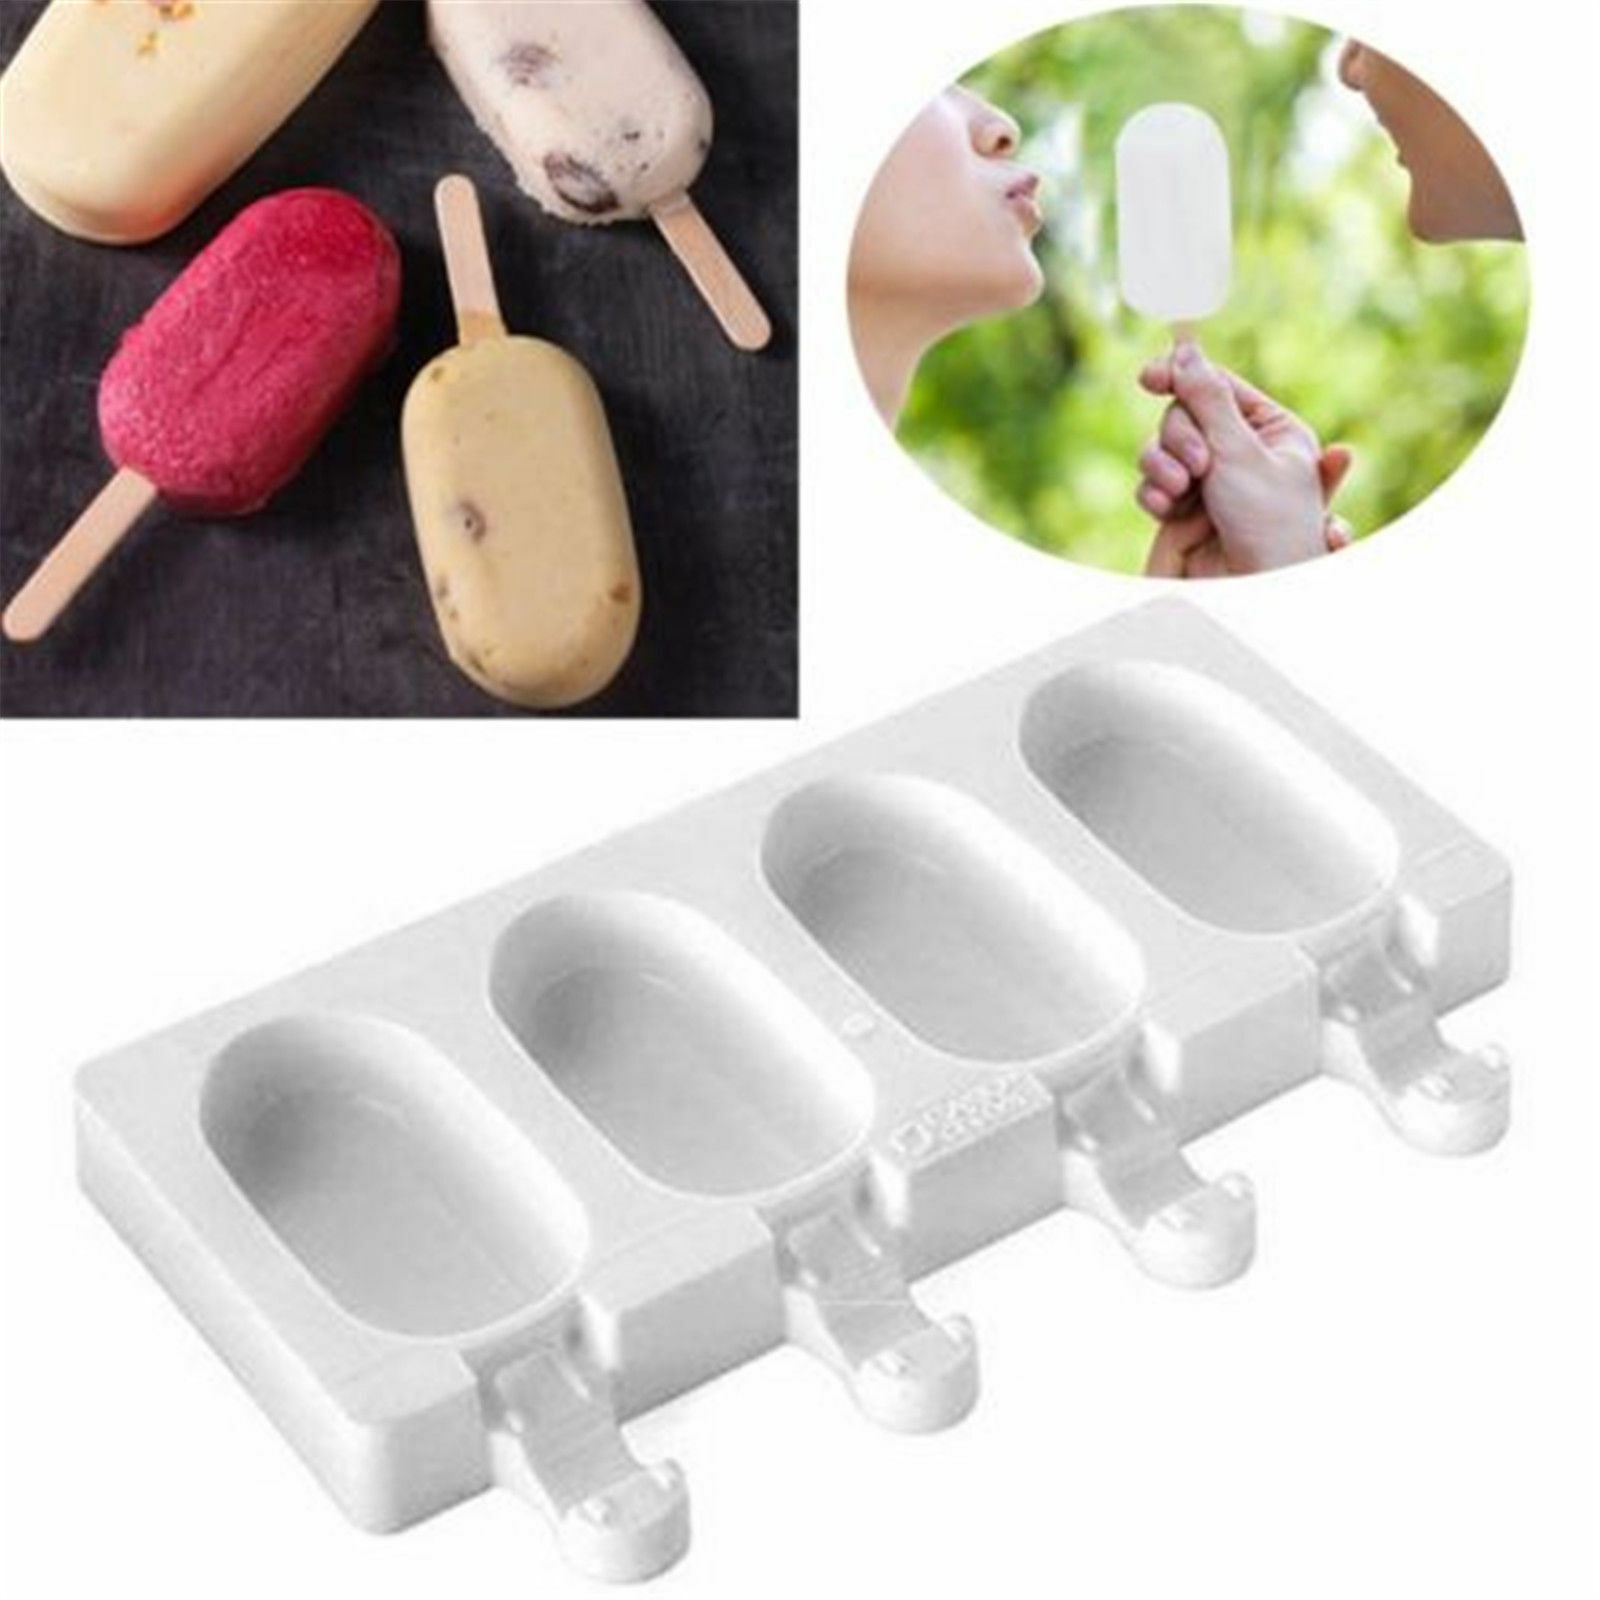 4 Cell Silicone Popsicle Mold 4 Cavity Frozen Ice Cream Mould Pop Lollipop Tray